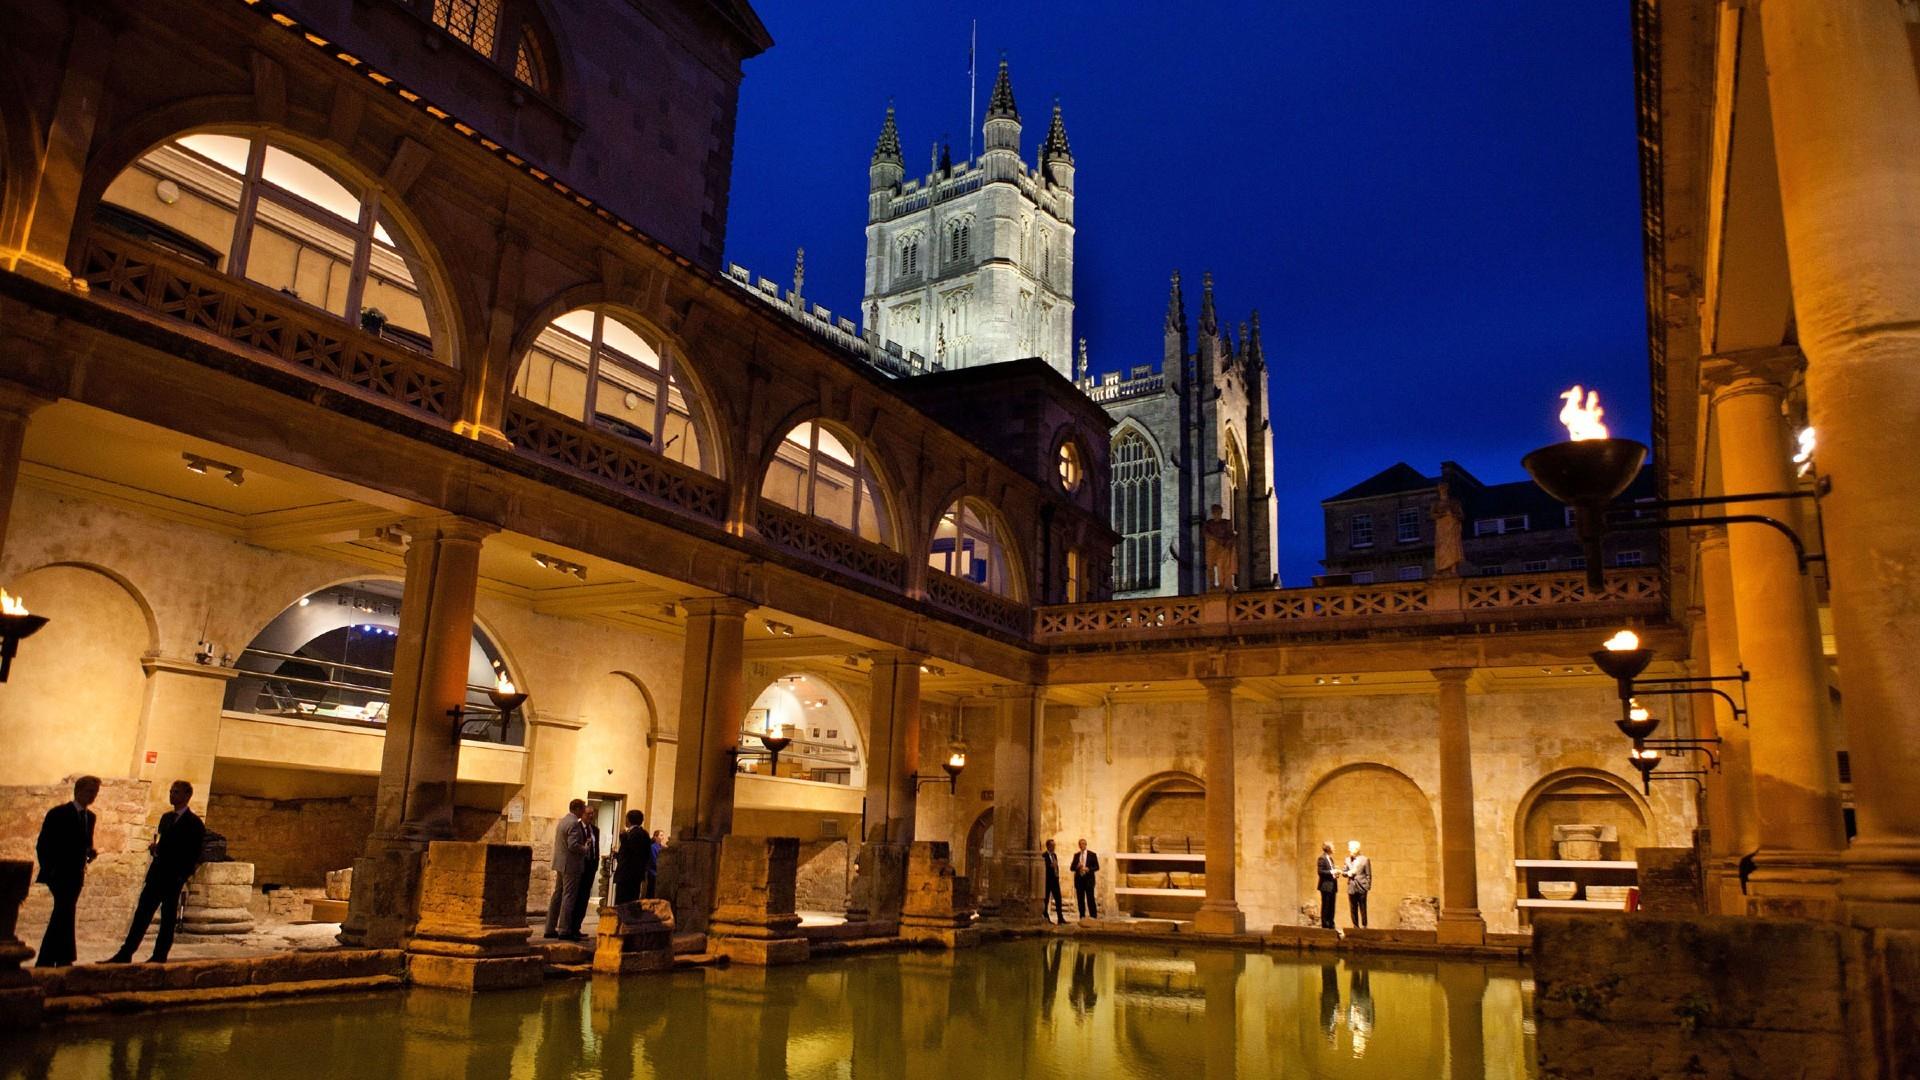 The Roman Baths at night with people enjoying the attraction